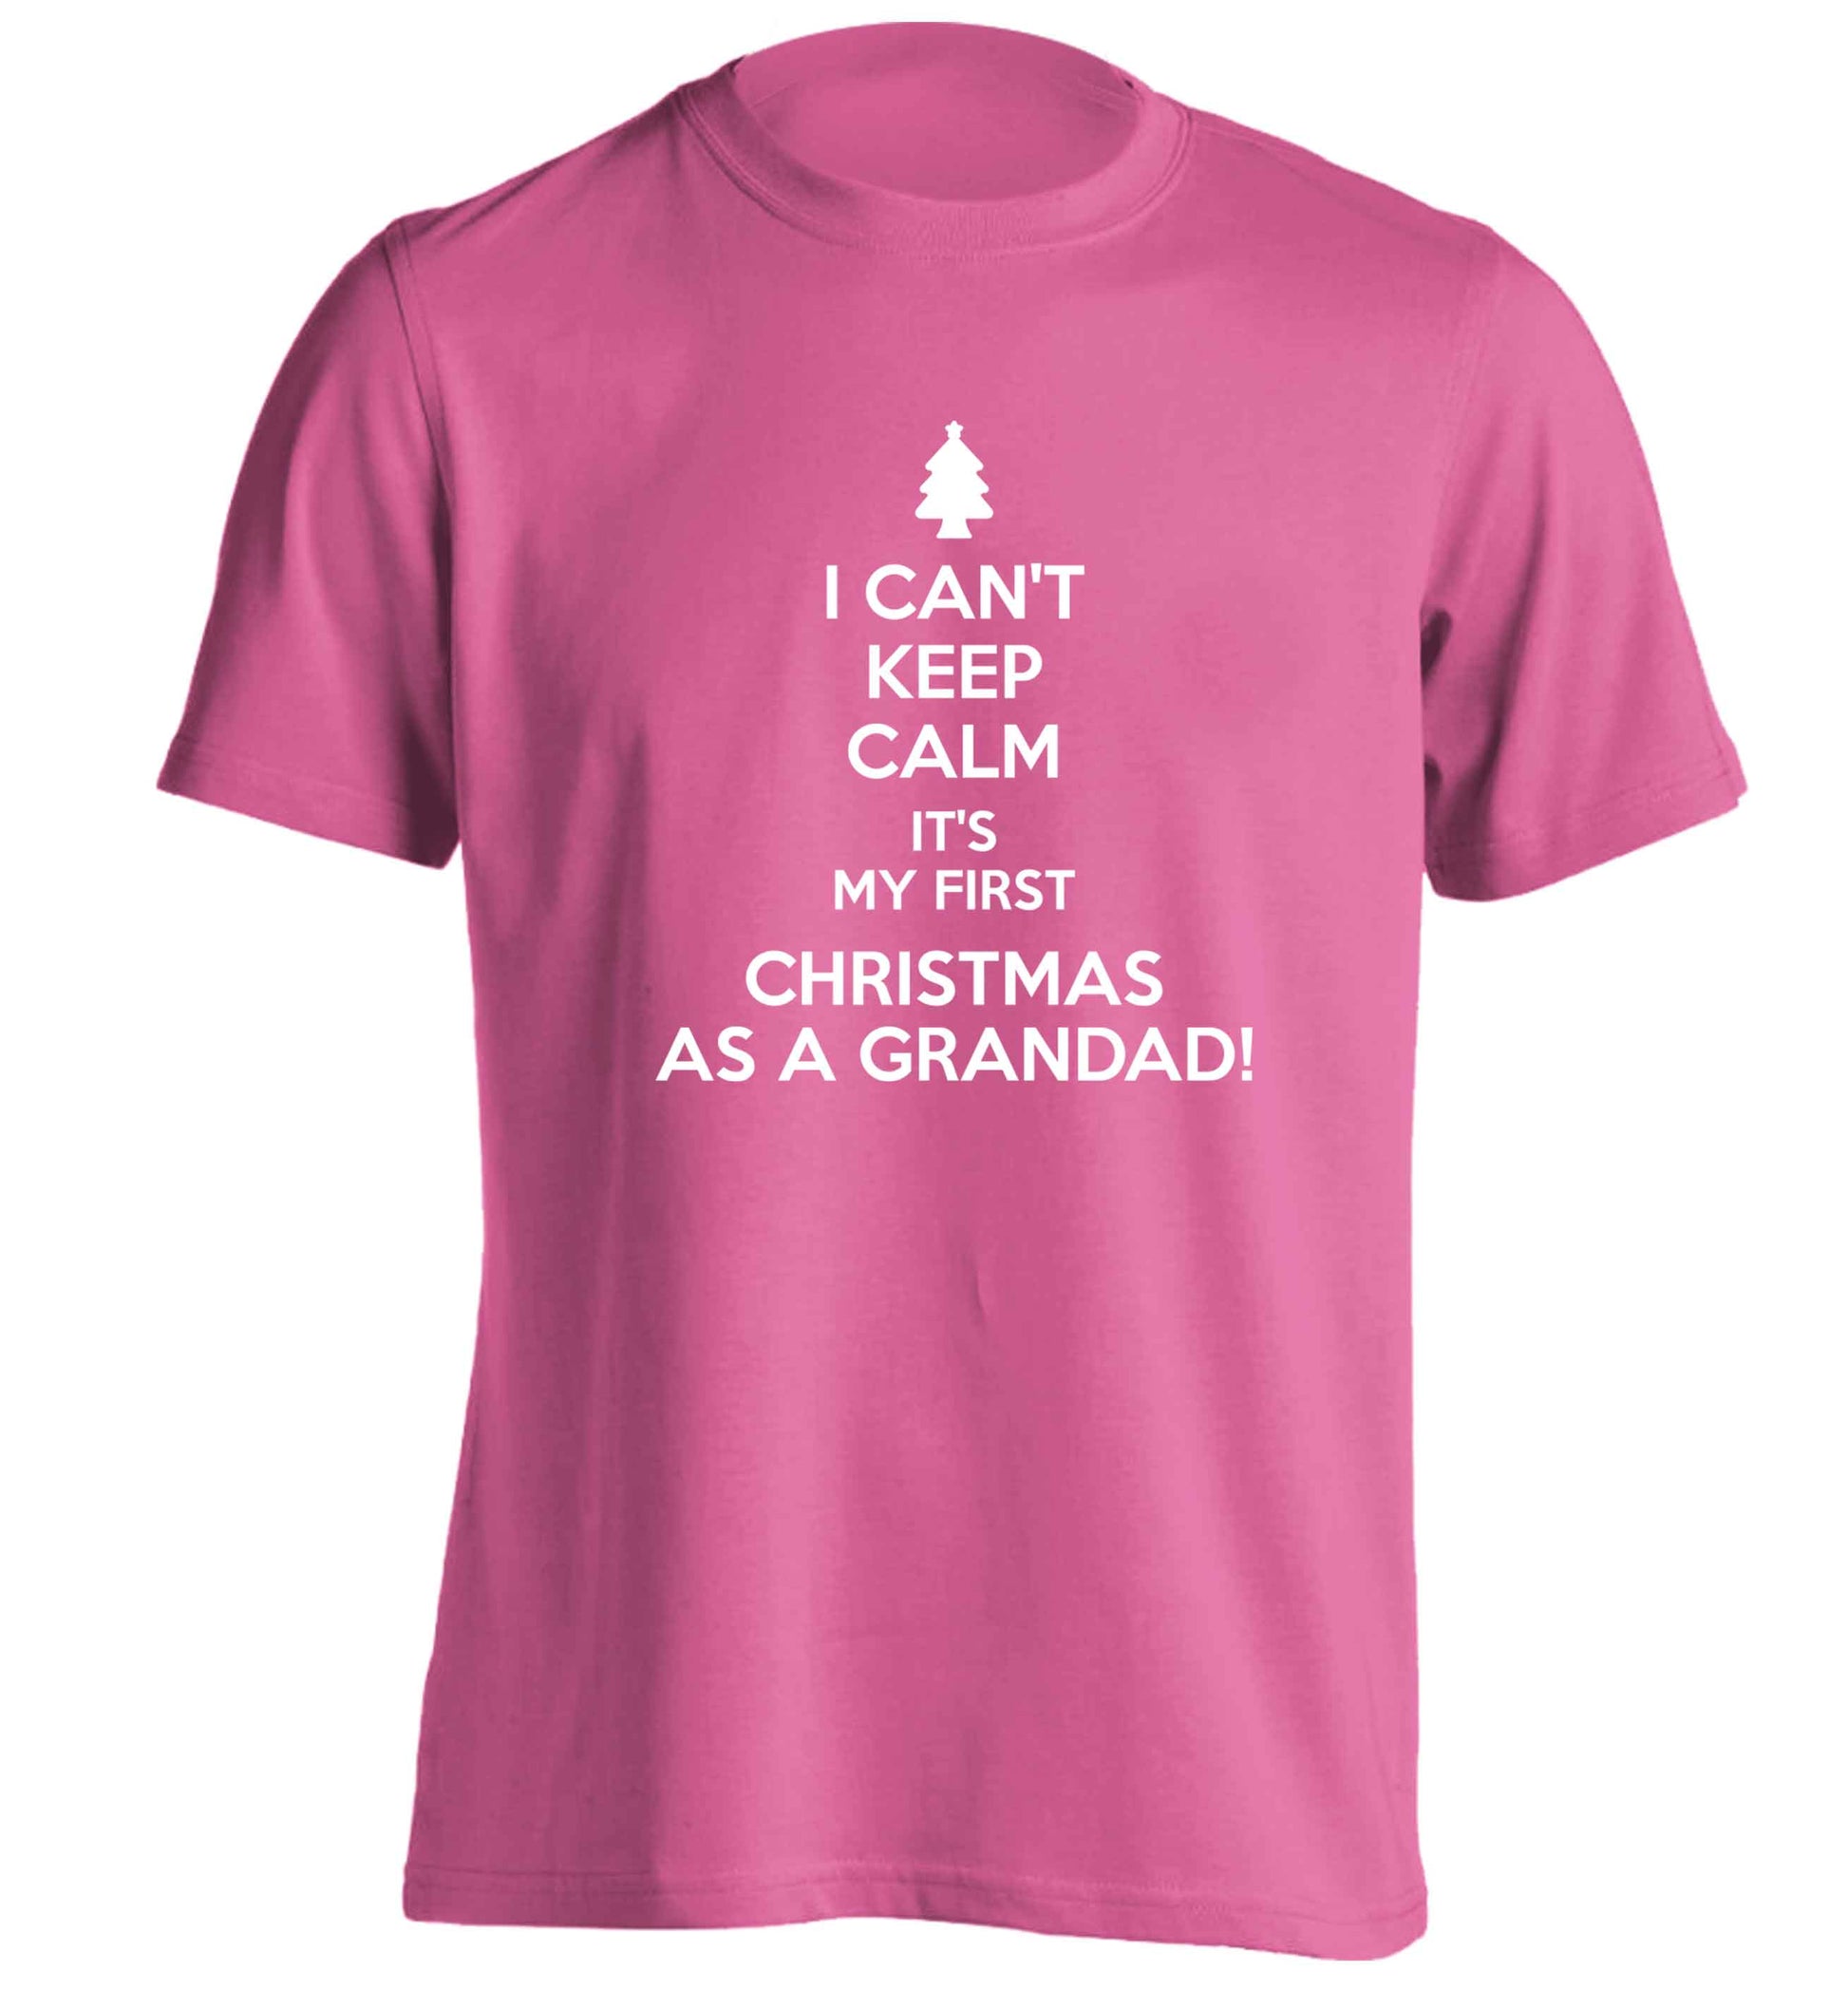 I can't keep calm it's my first Christmas as a grandad! adults unisex pink Tshirt 2XL